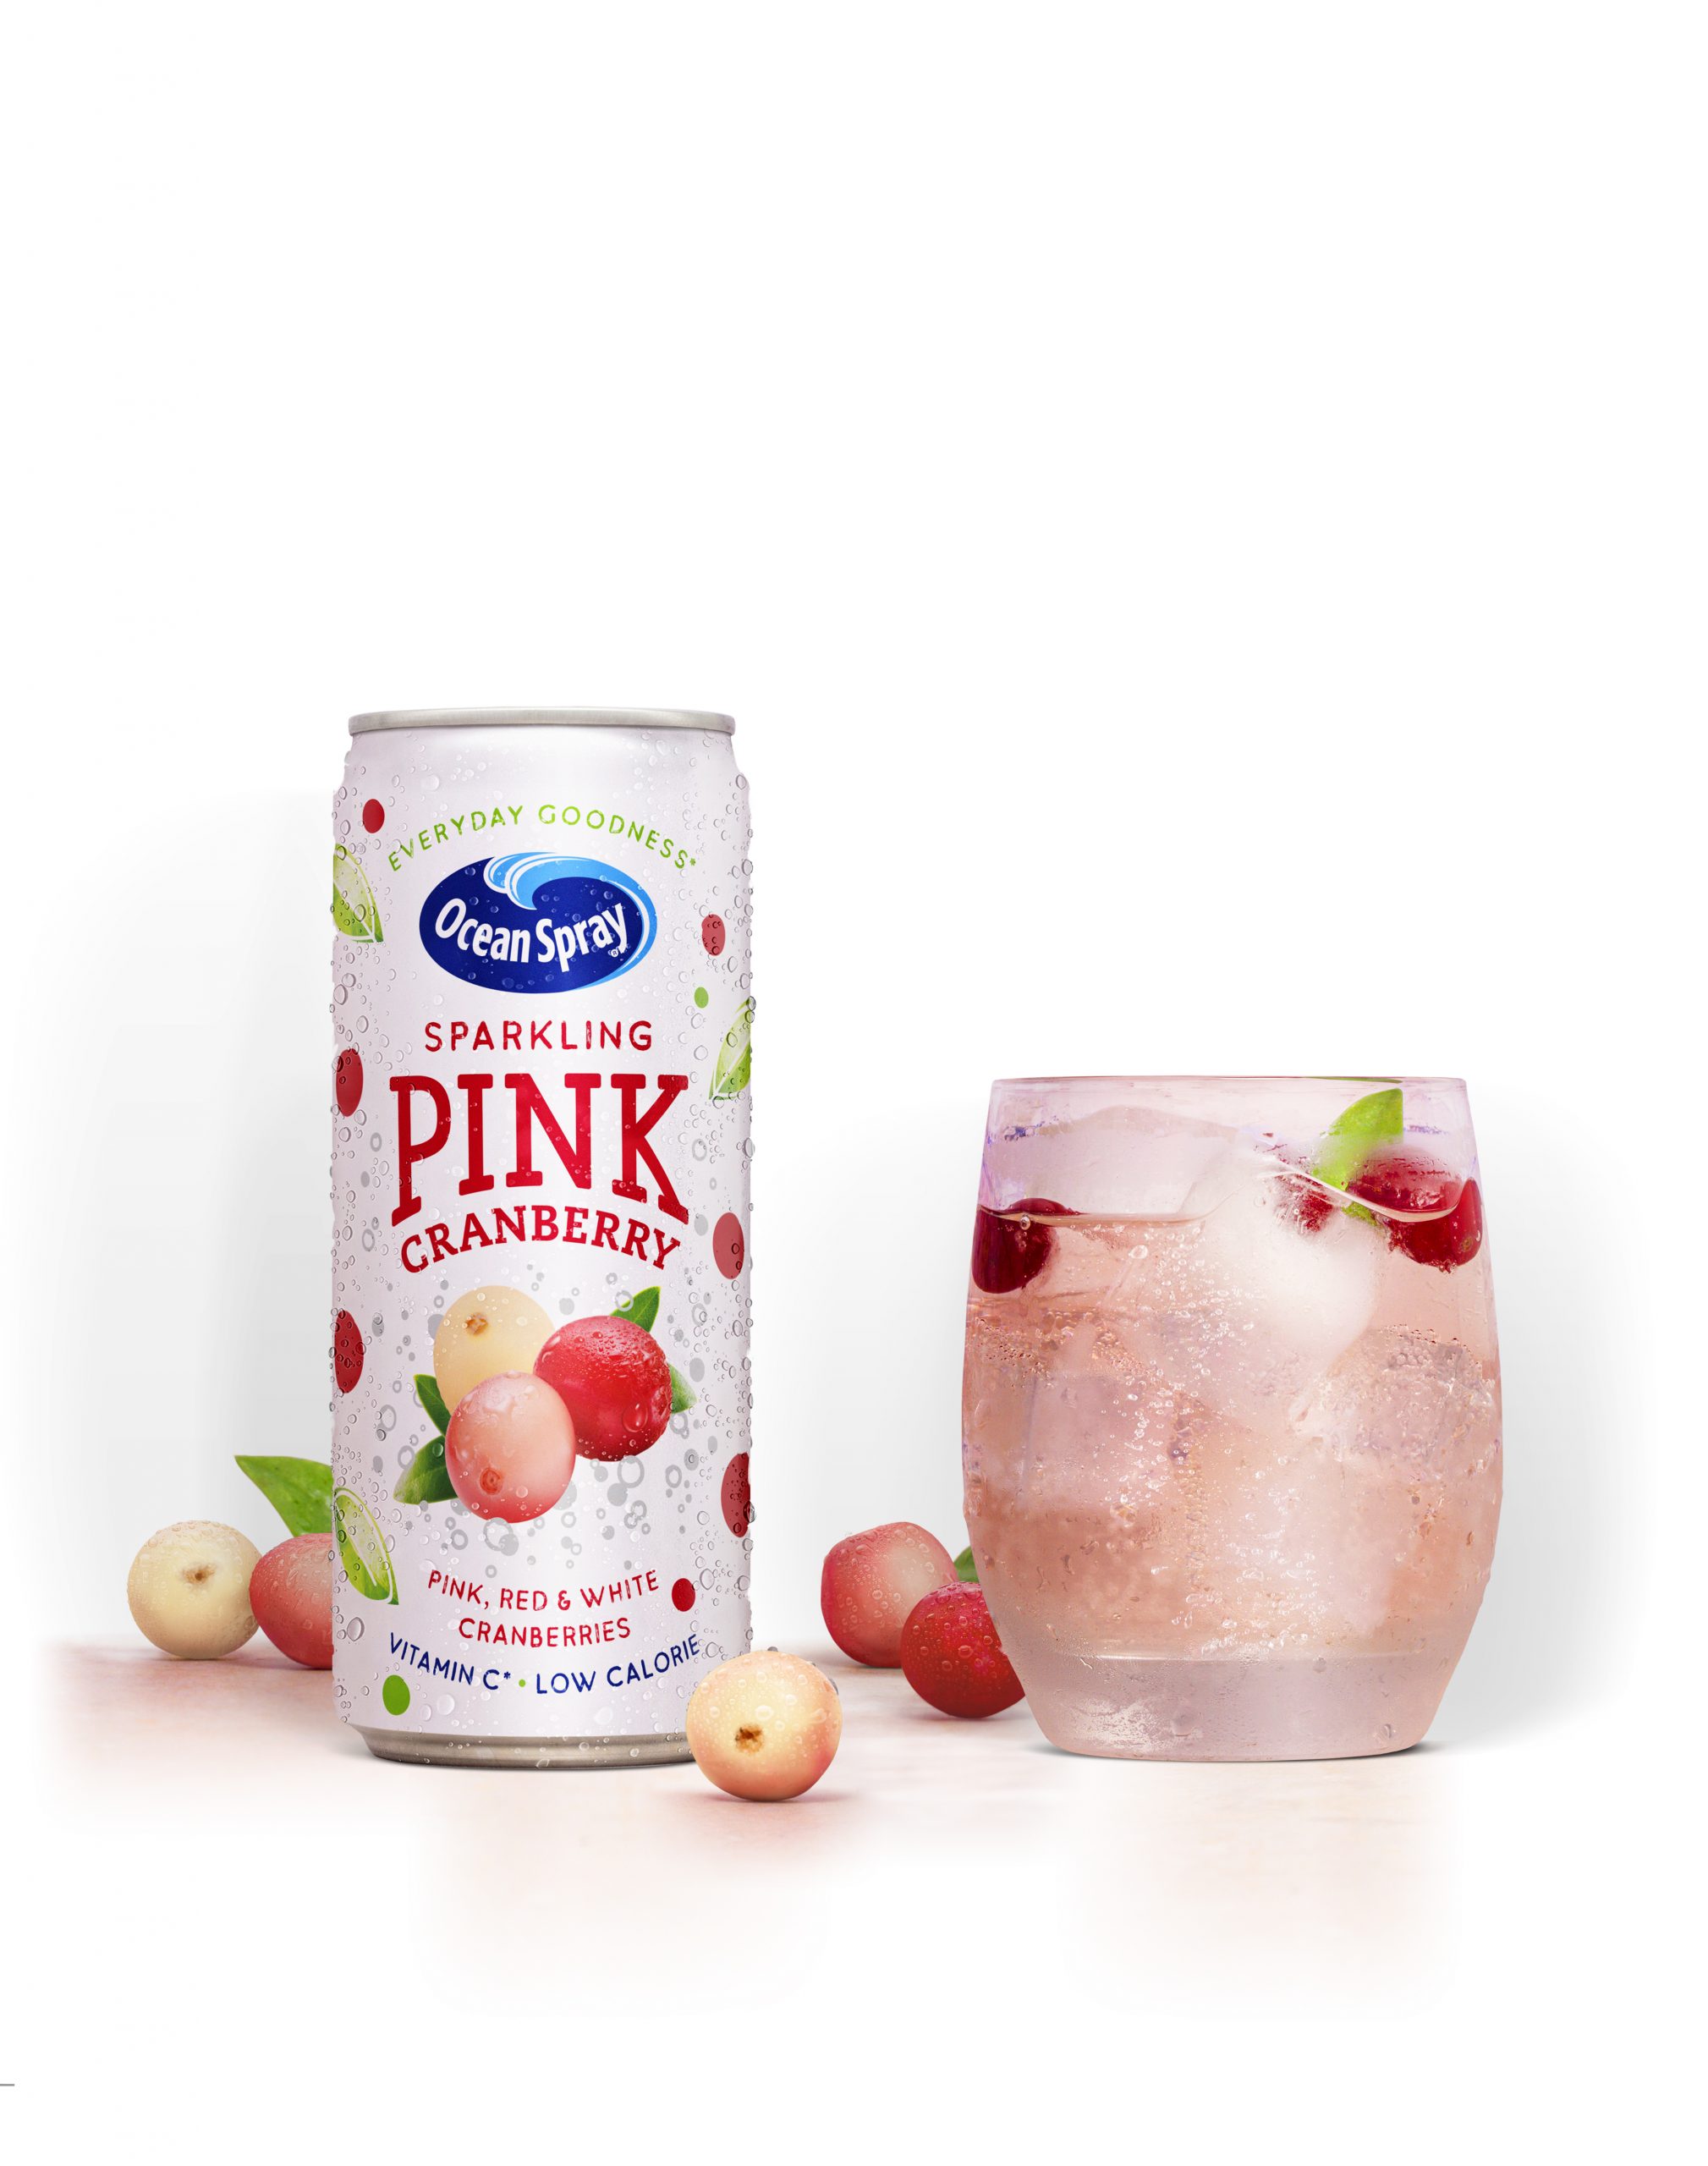 Ocean Spray launches Sparkling Pink Cranberry